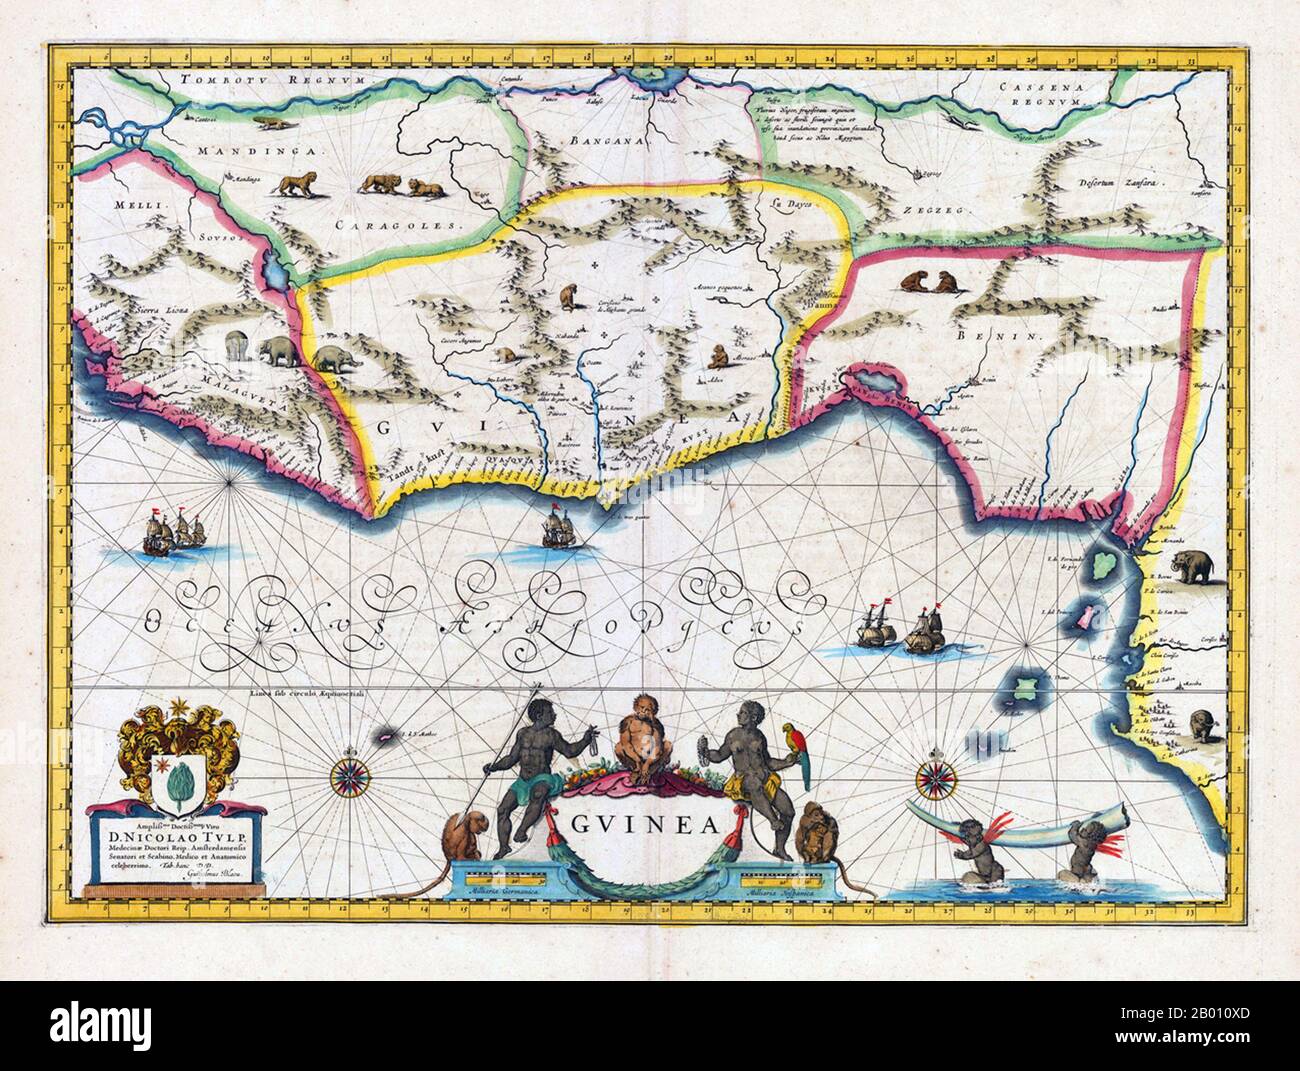 Africa: Map of Guinea and surrounding regions. The Benin Kingdom is indicated in the east. Map by Willem Blaeu (1571-1638) & Joan Bleau (1596-1673), Amsterdam, 1640-1650. Stock Photo